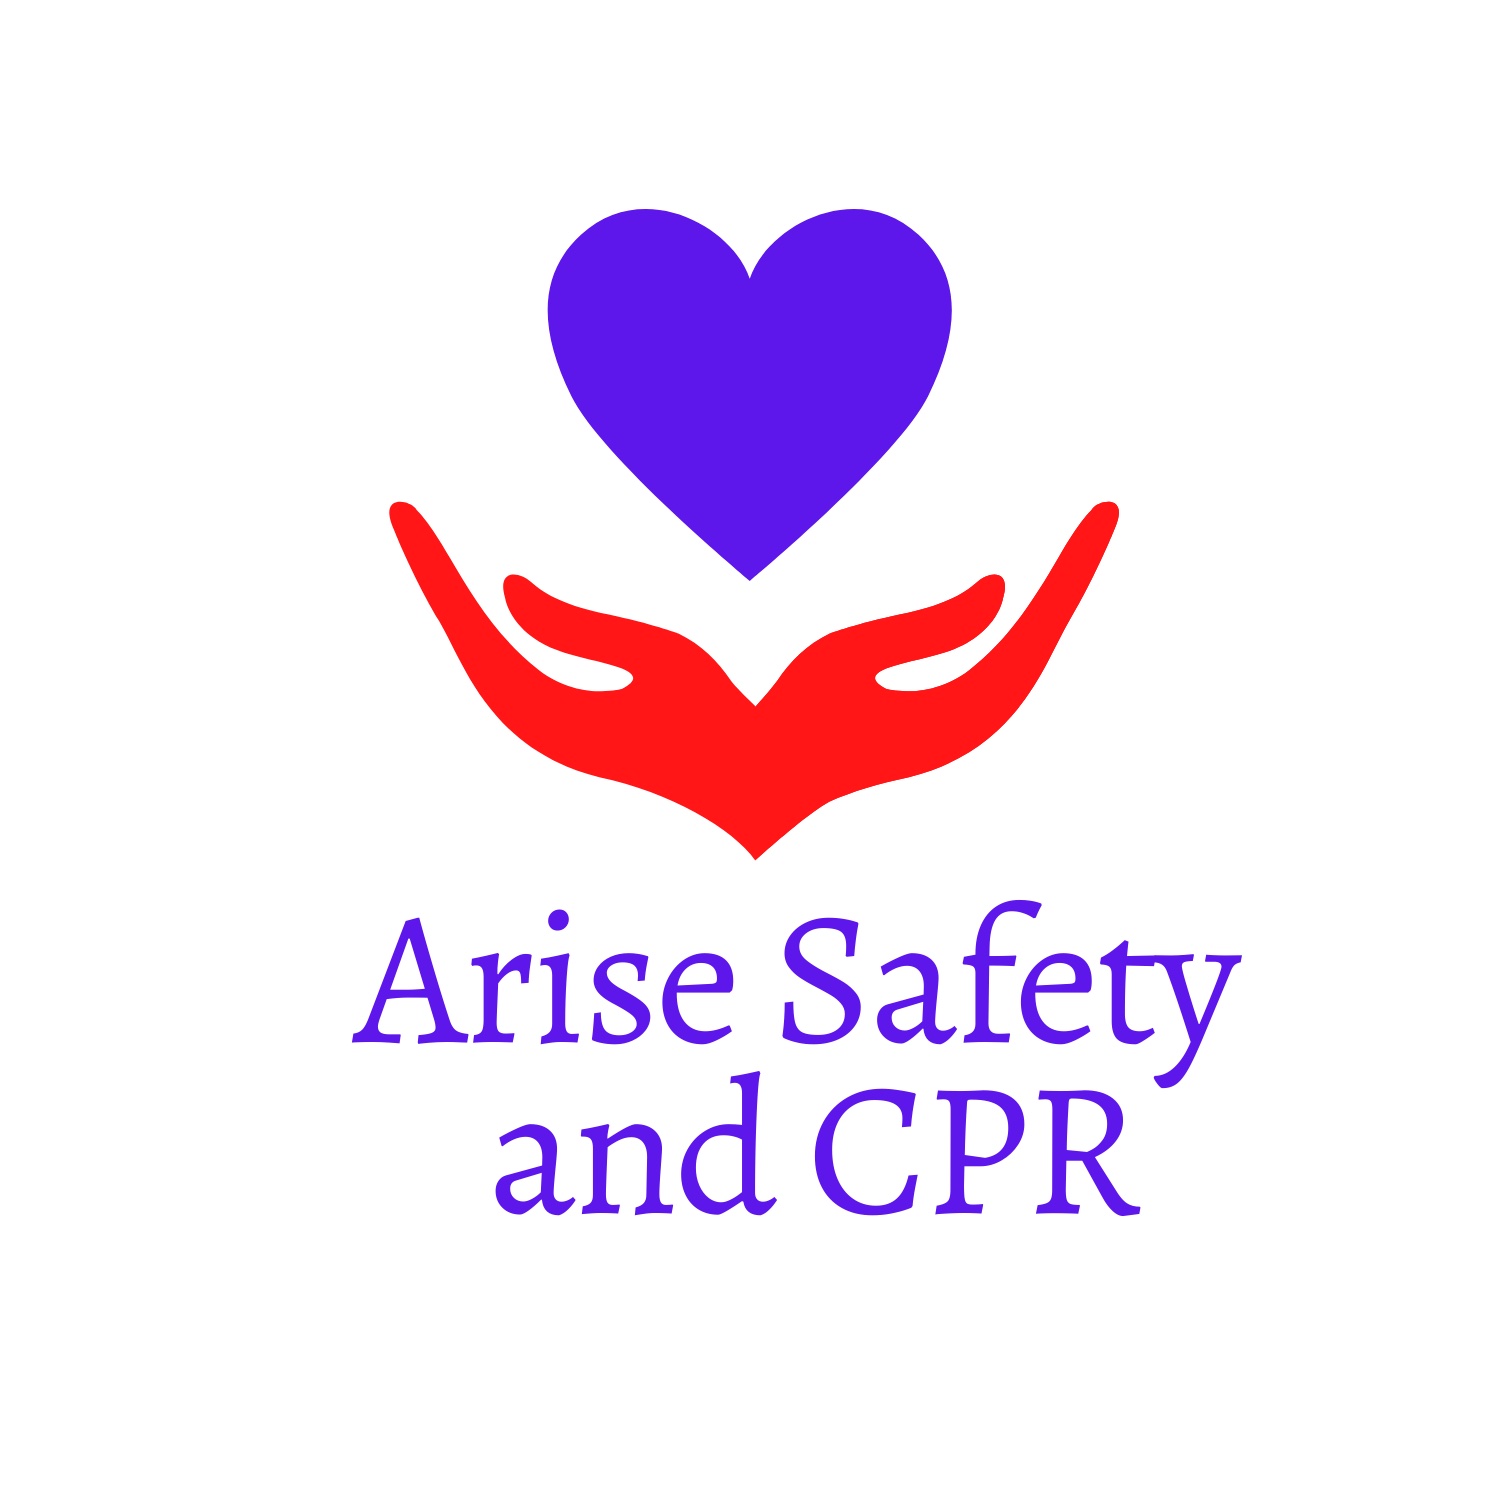 Arise Safety and CPR